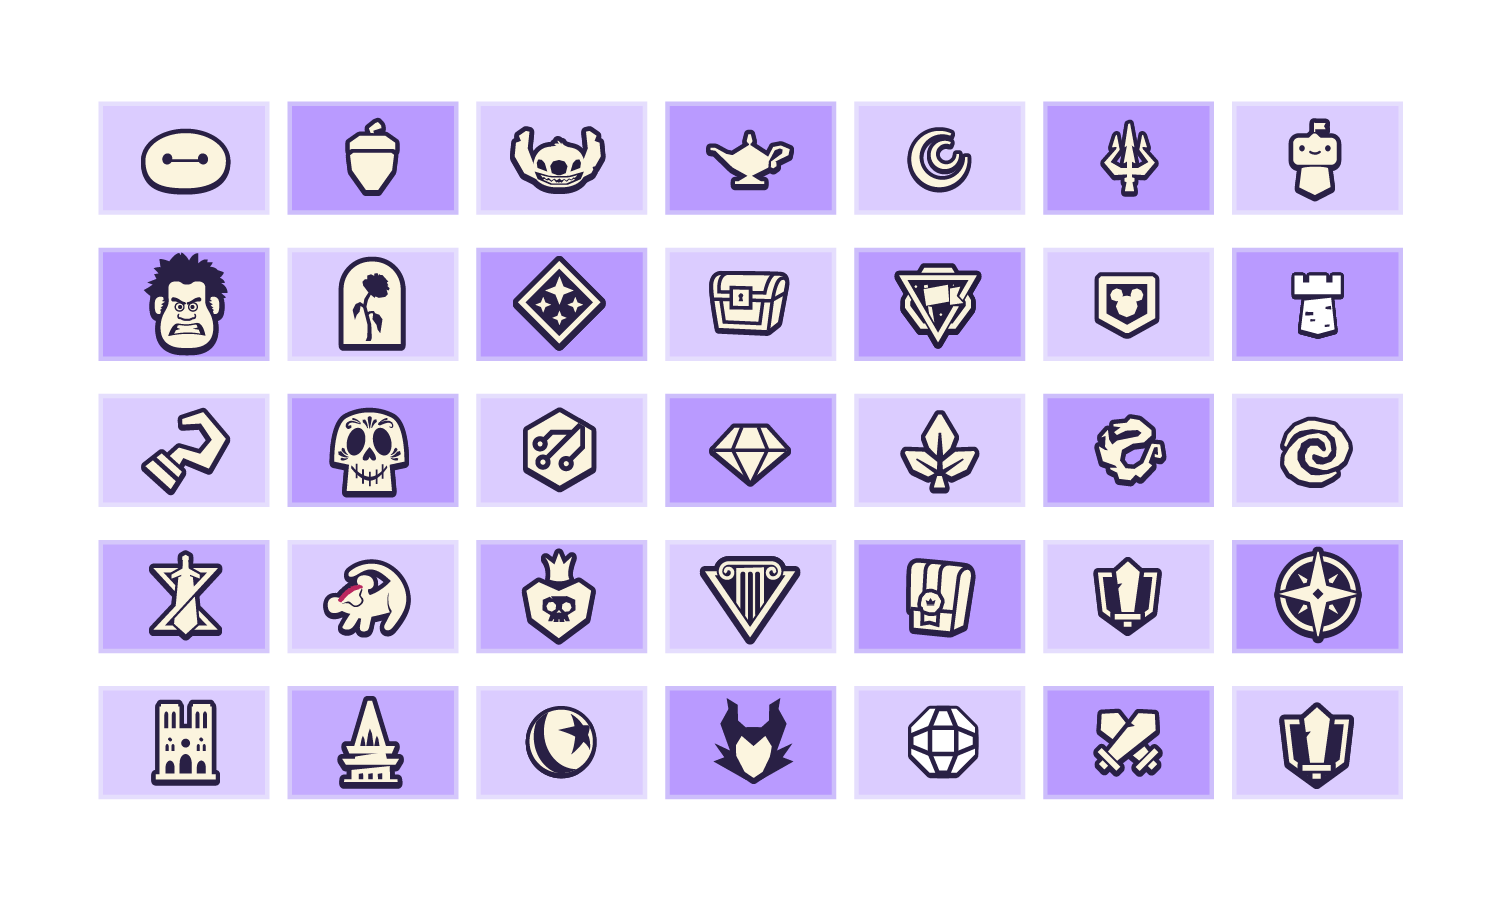 tab_icons.png